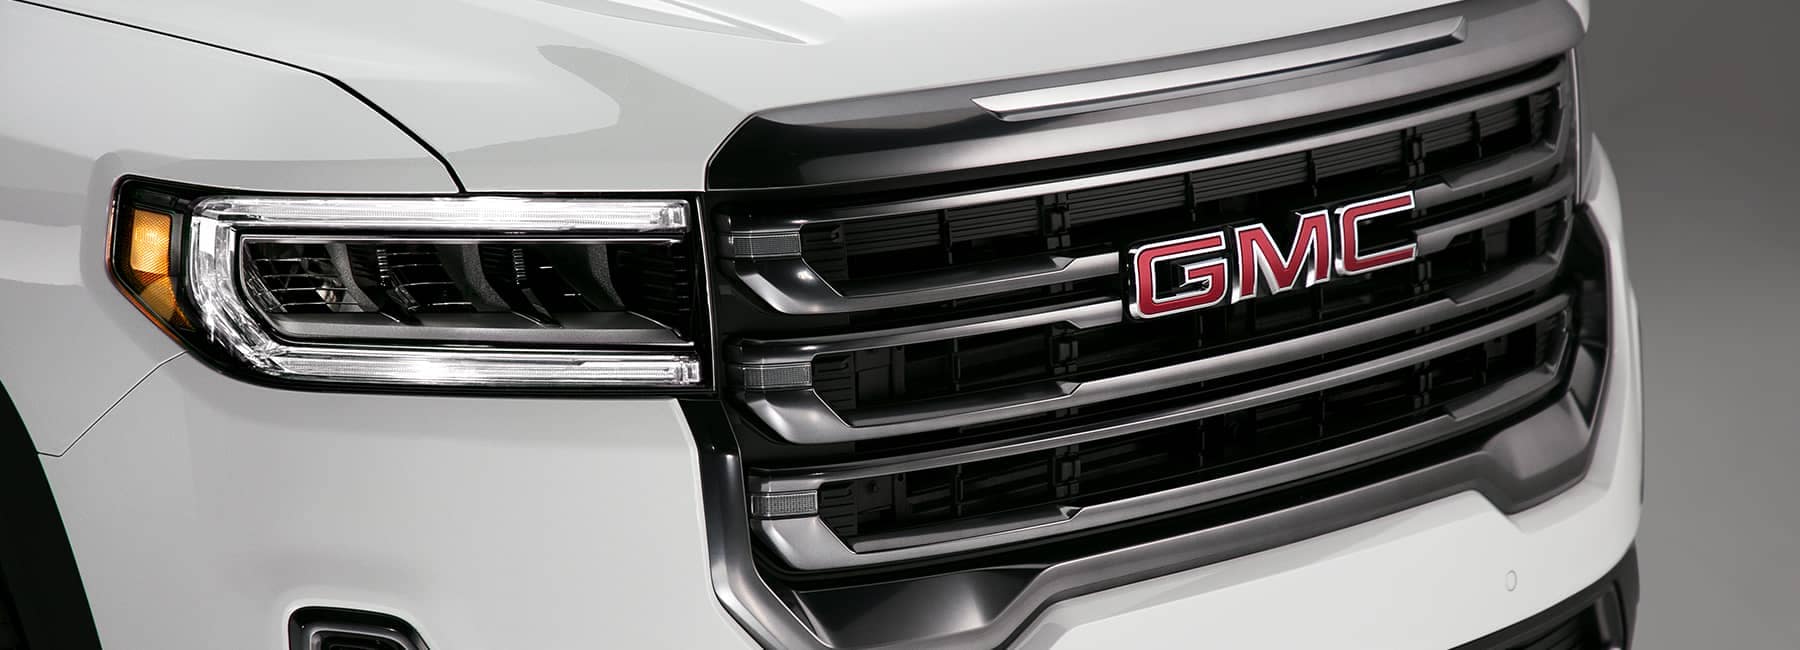 2020 GMC Acadia Grille